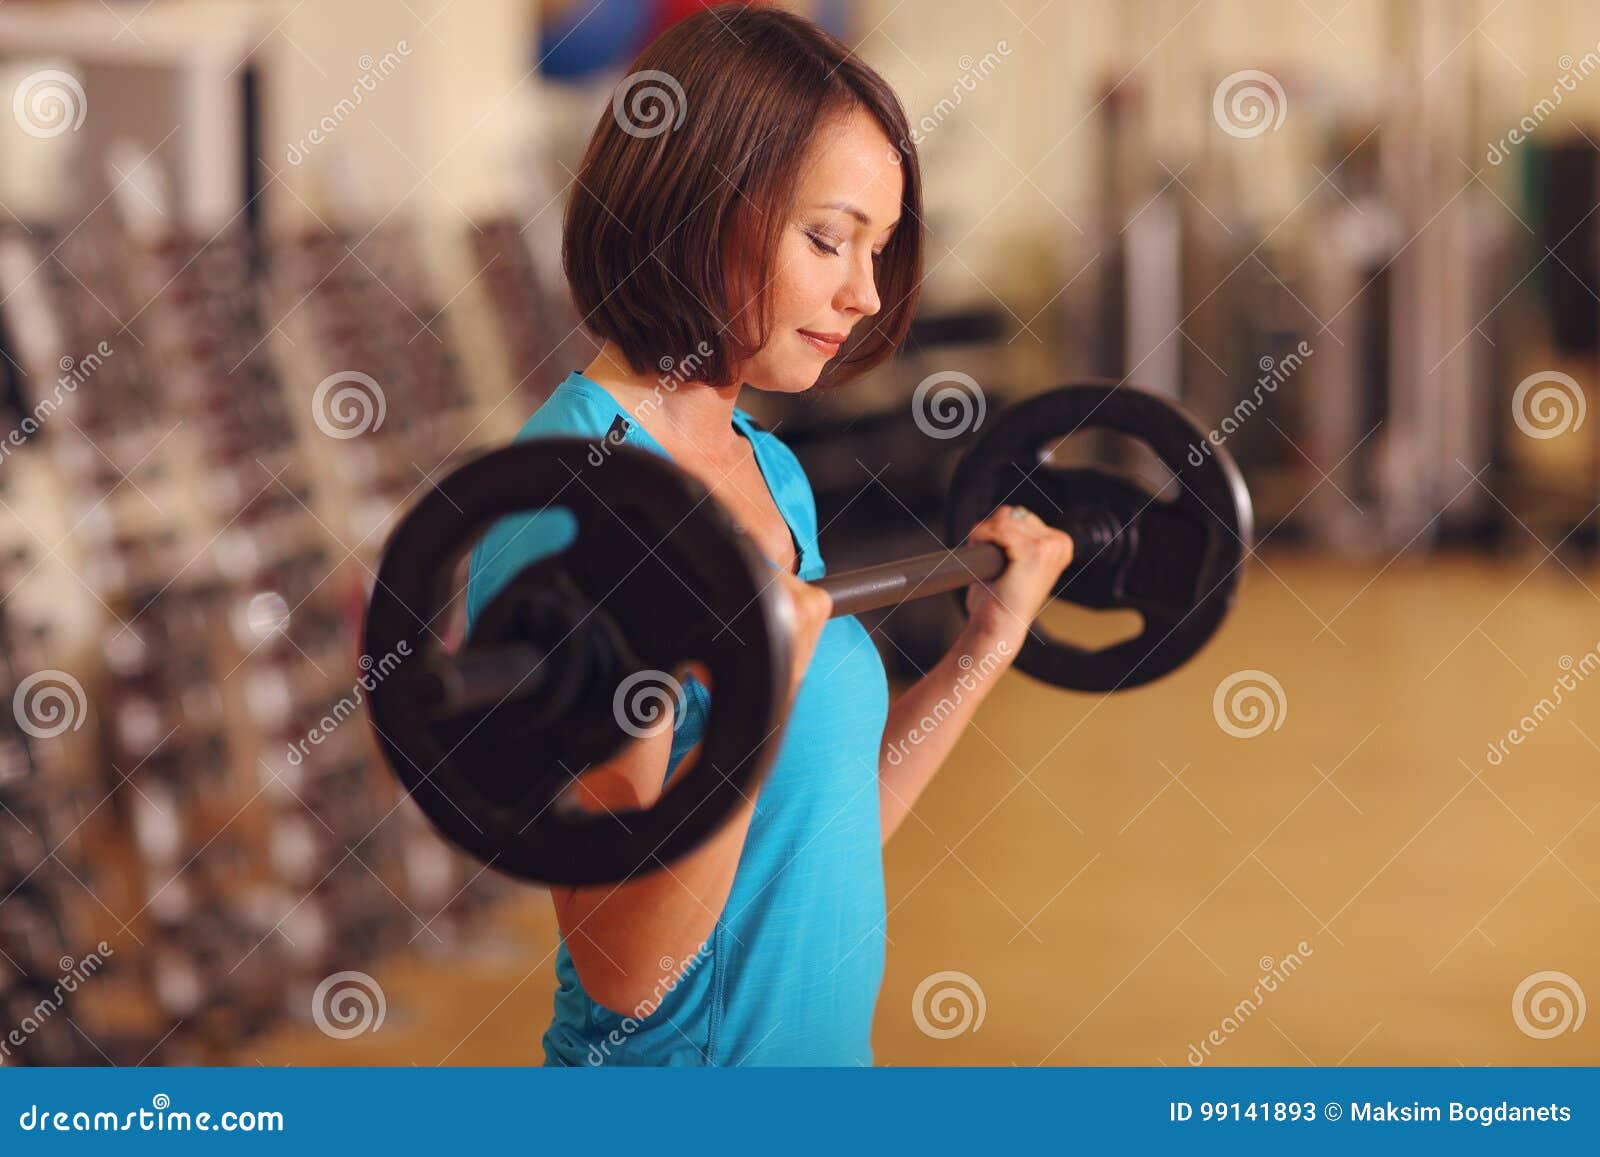 Bodybuilding. Woman Exercising With Barbell In Fitness Class. Female